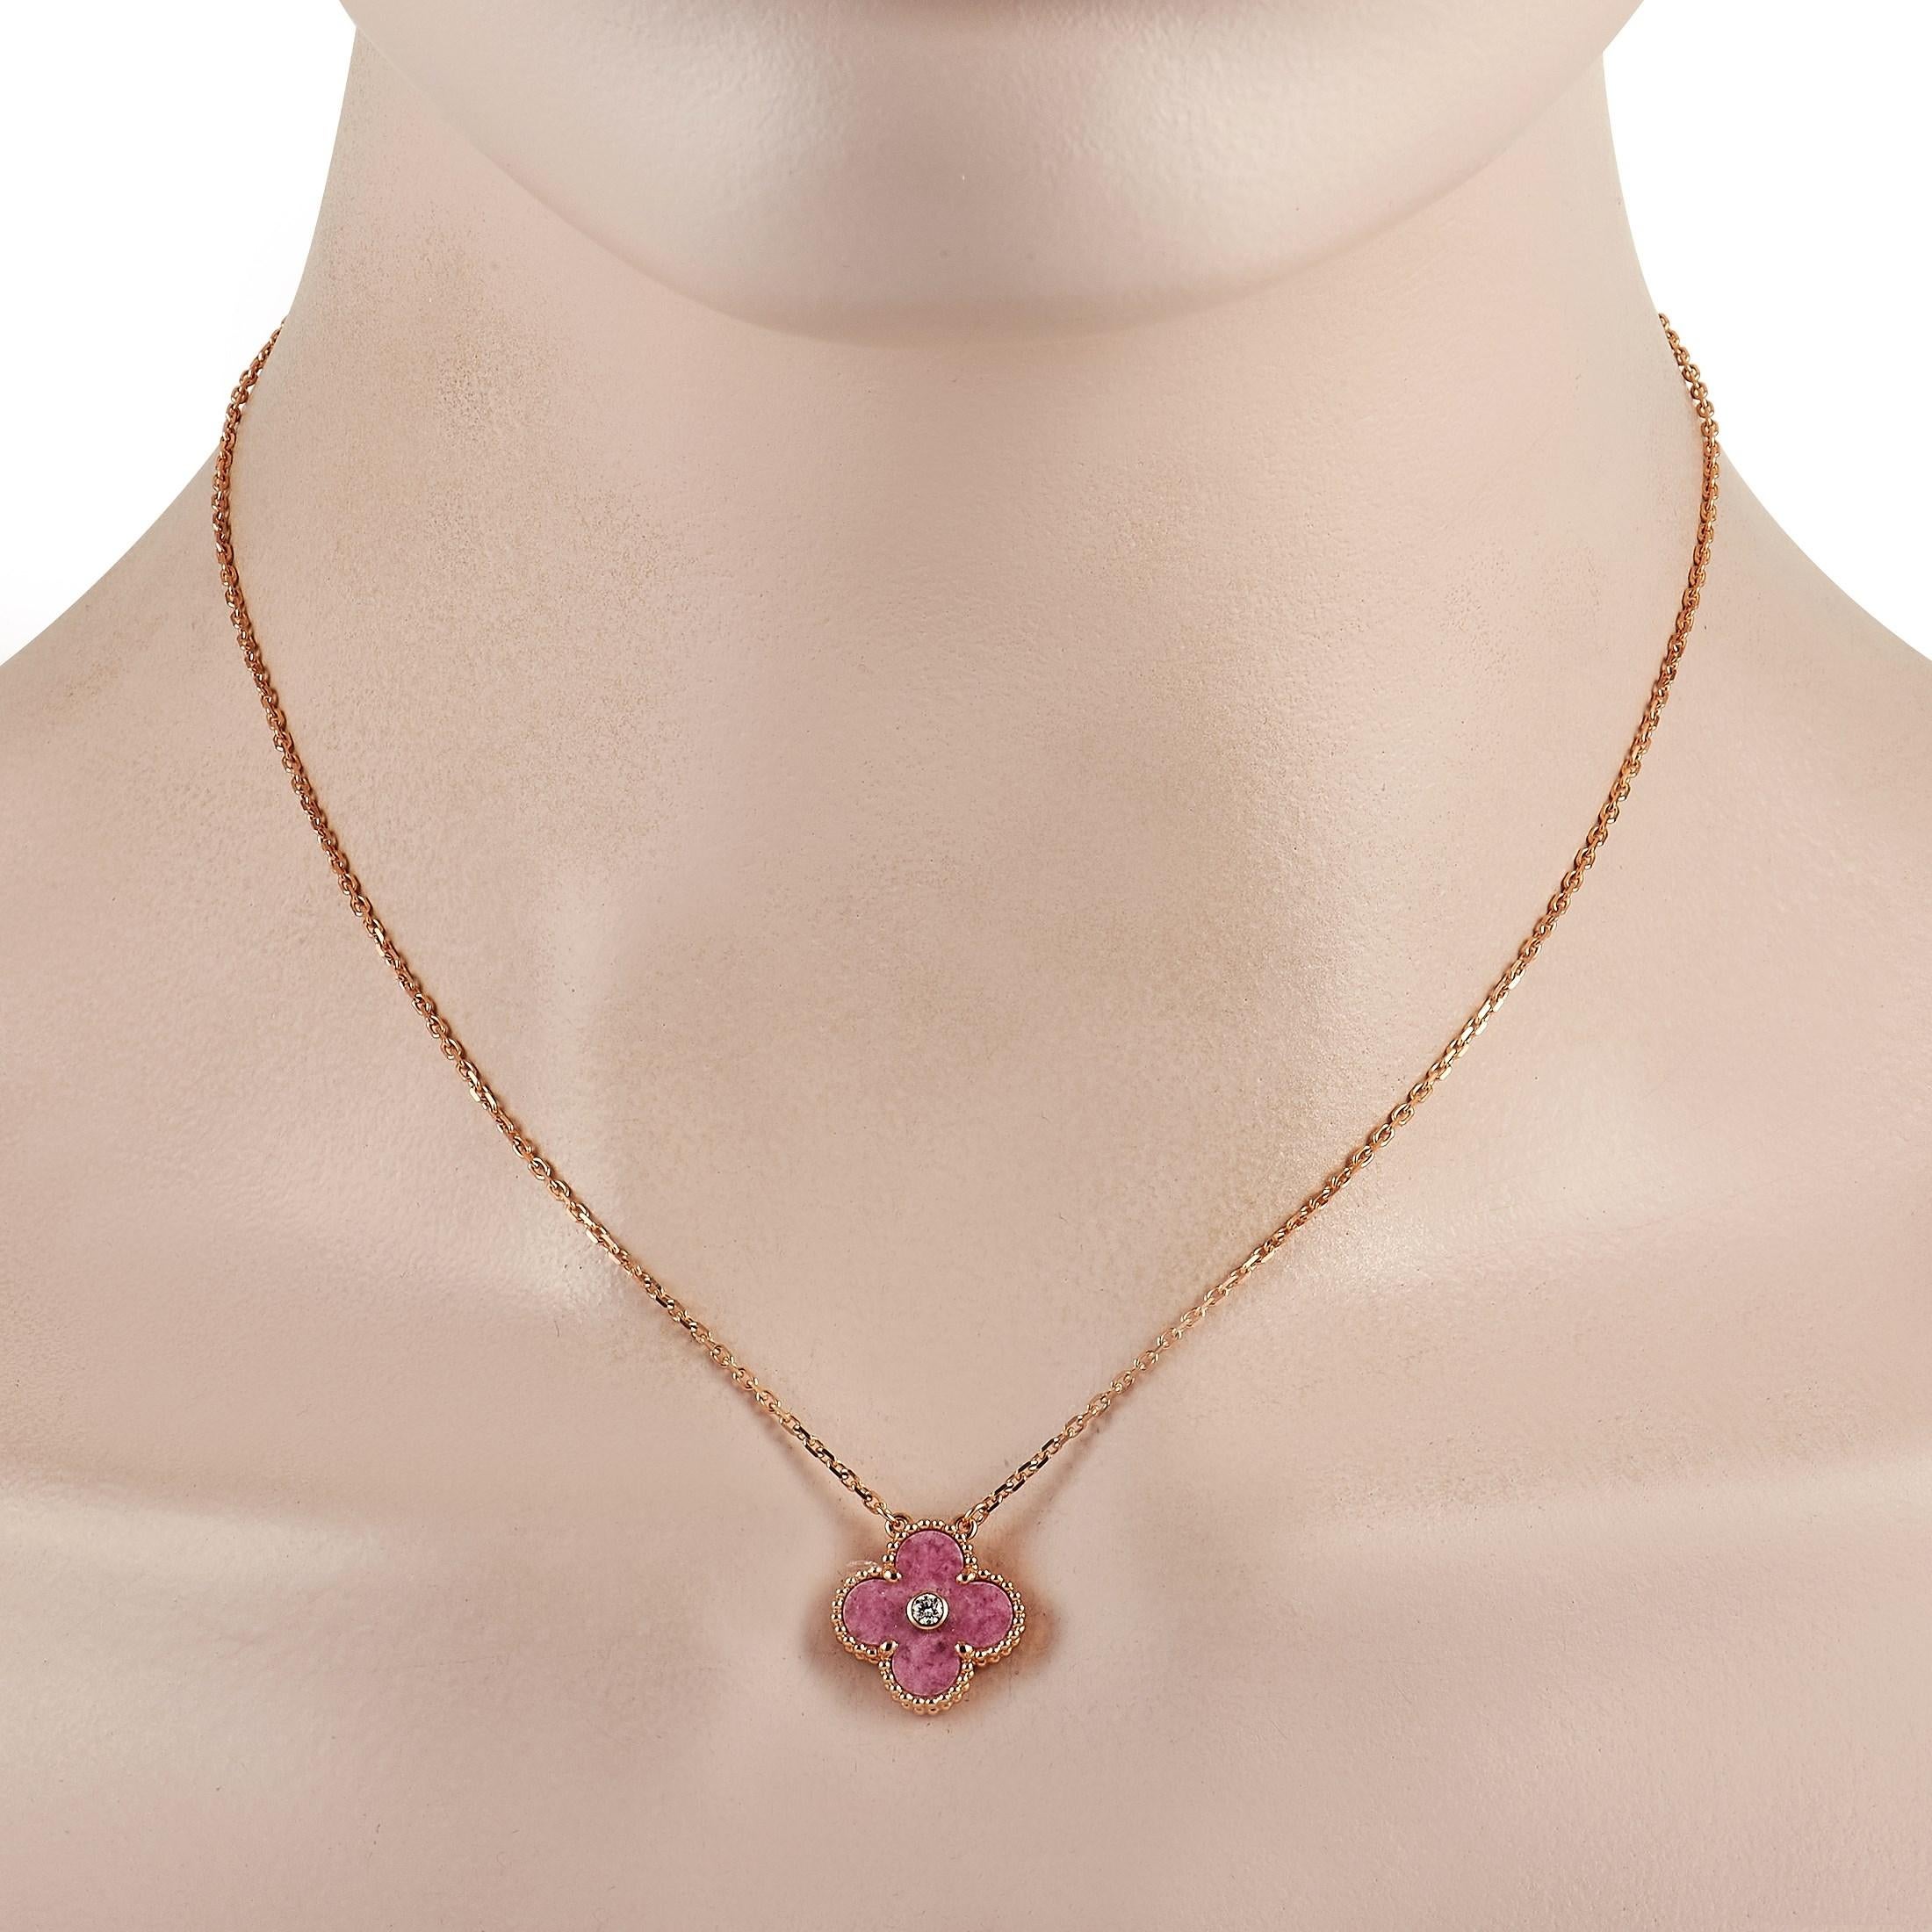 Valued for its timeless elegance, this clover leaf-inspired necklace from Van Cleef & Arpels will be a treasured piece to add to a jewelry collection. Released as a limited edition, this Alhambra pendant comes fashioned in rose gold bearing the